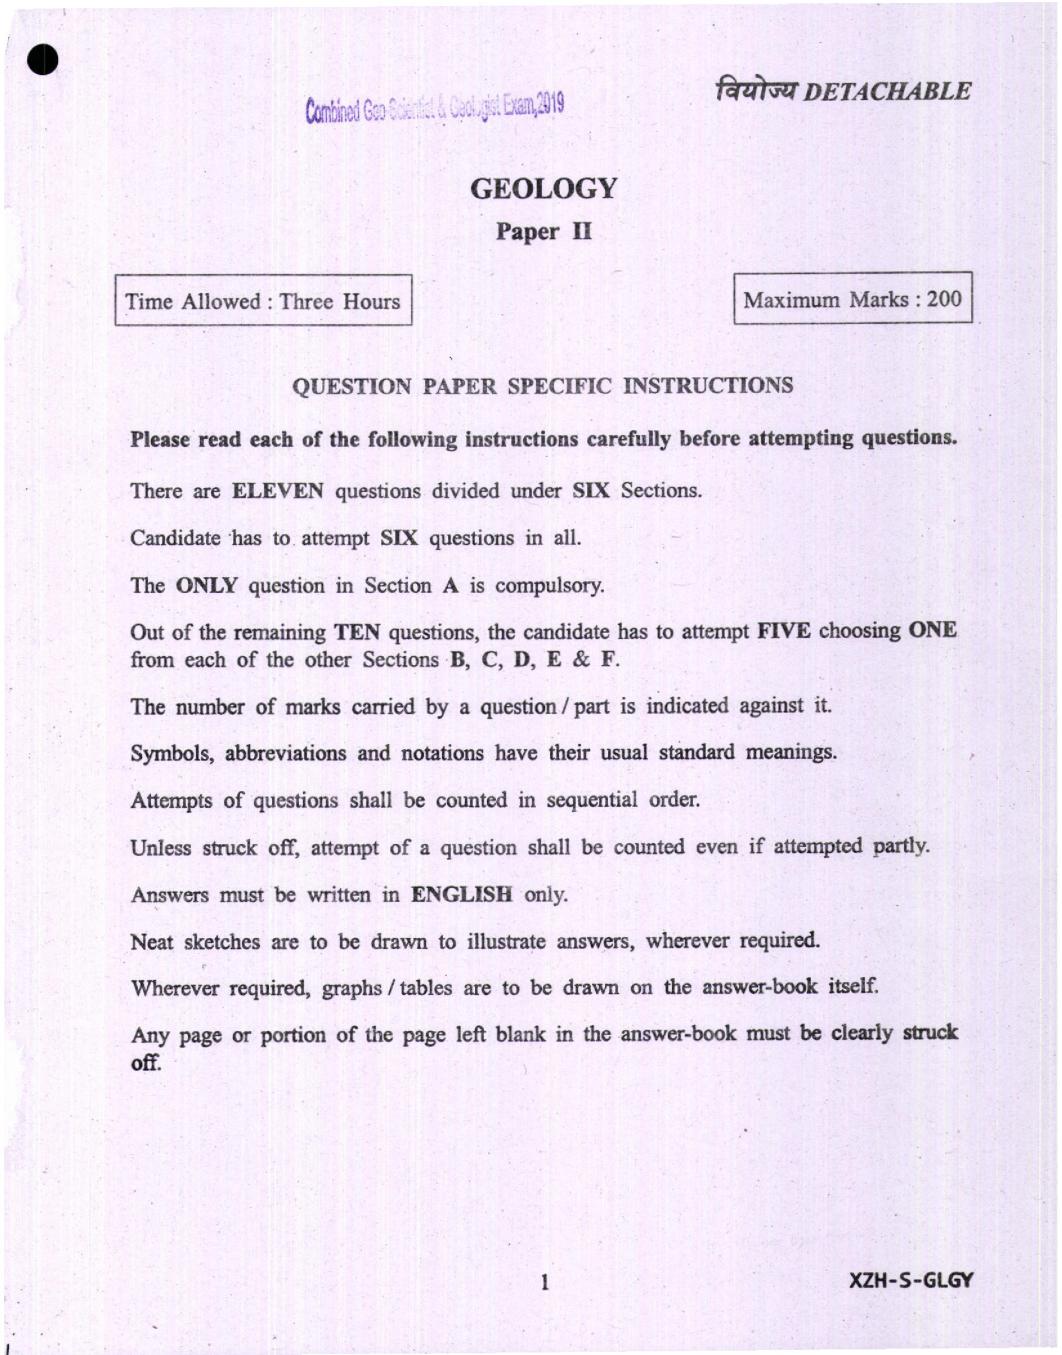 UPSC CGGE 2019 Question Paper Geology Paper II - Page 1